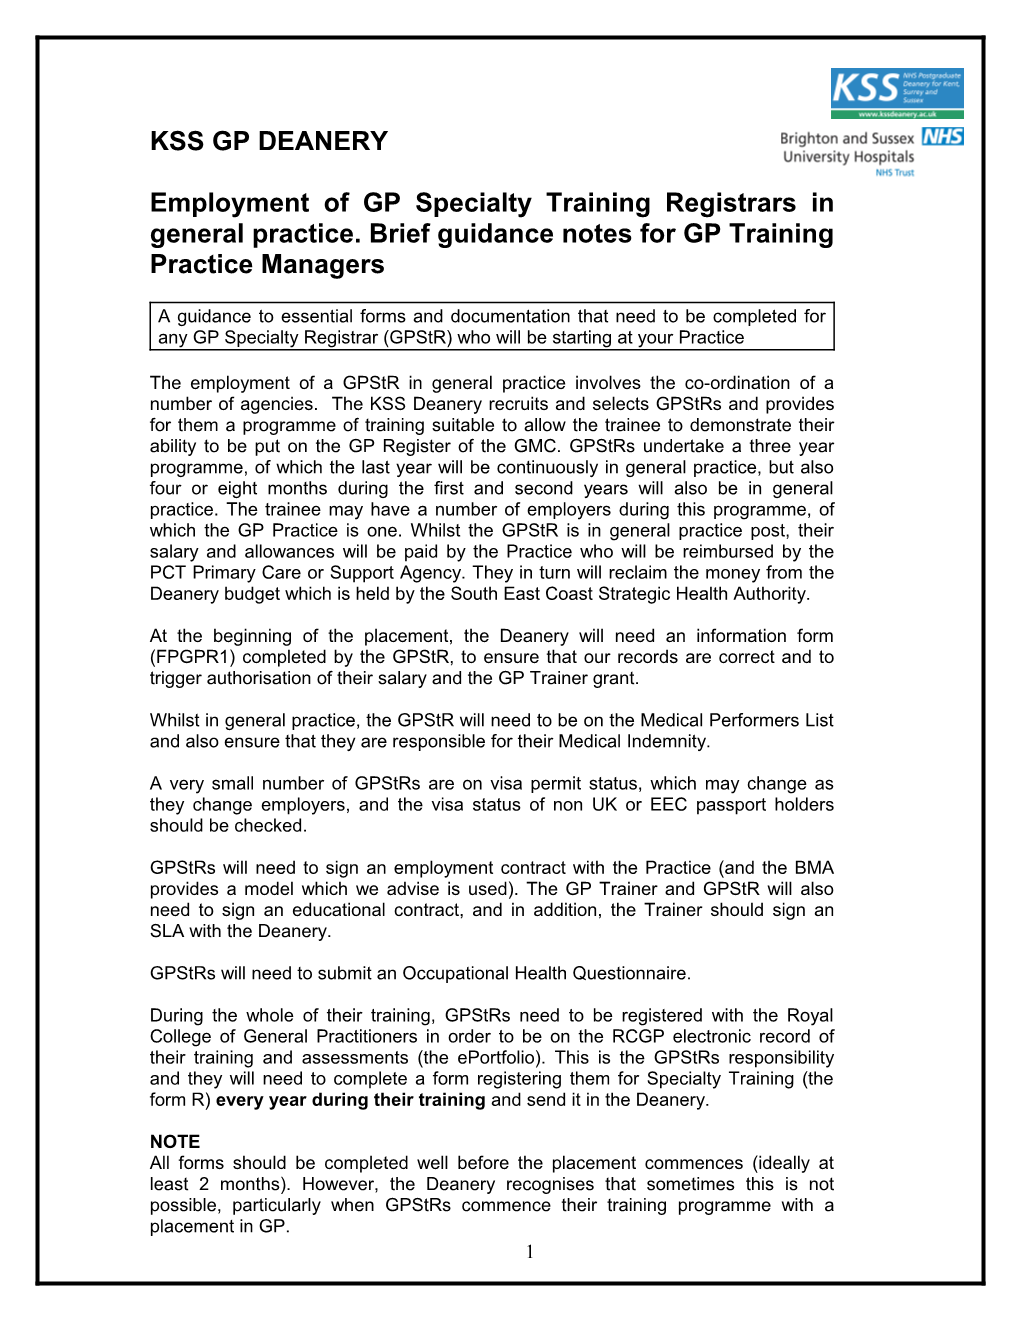 Employment of GP Specialty Training Registrars in General Practice.Brief Guidance Notes